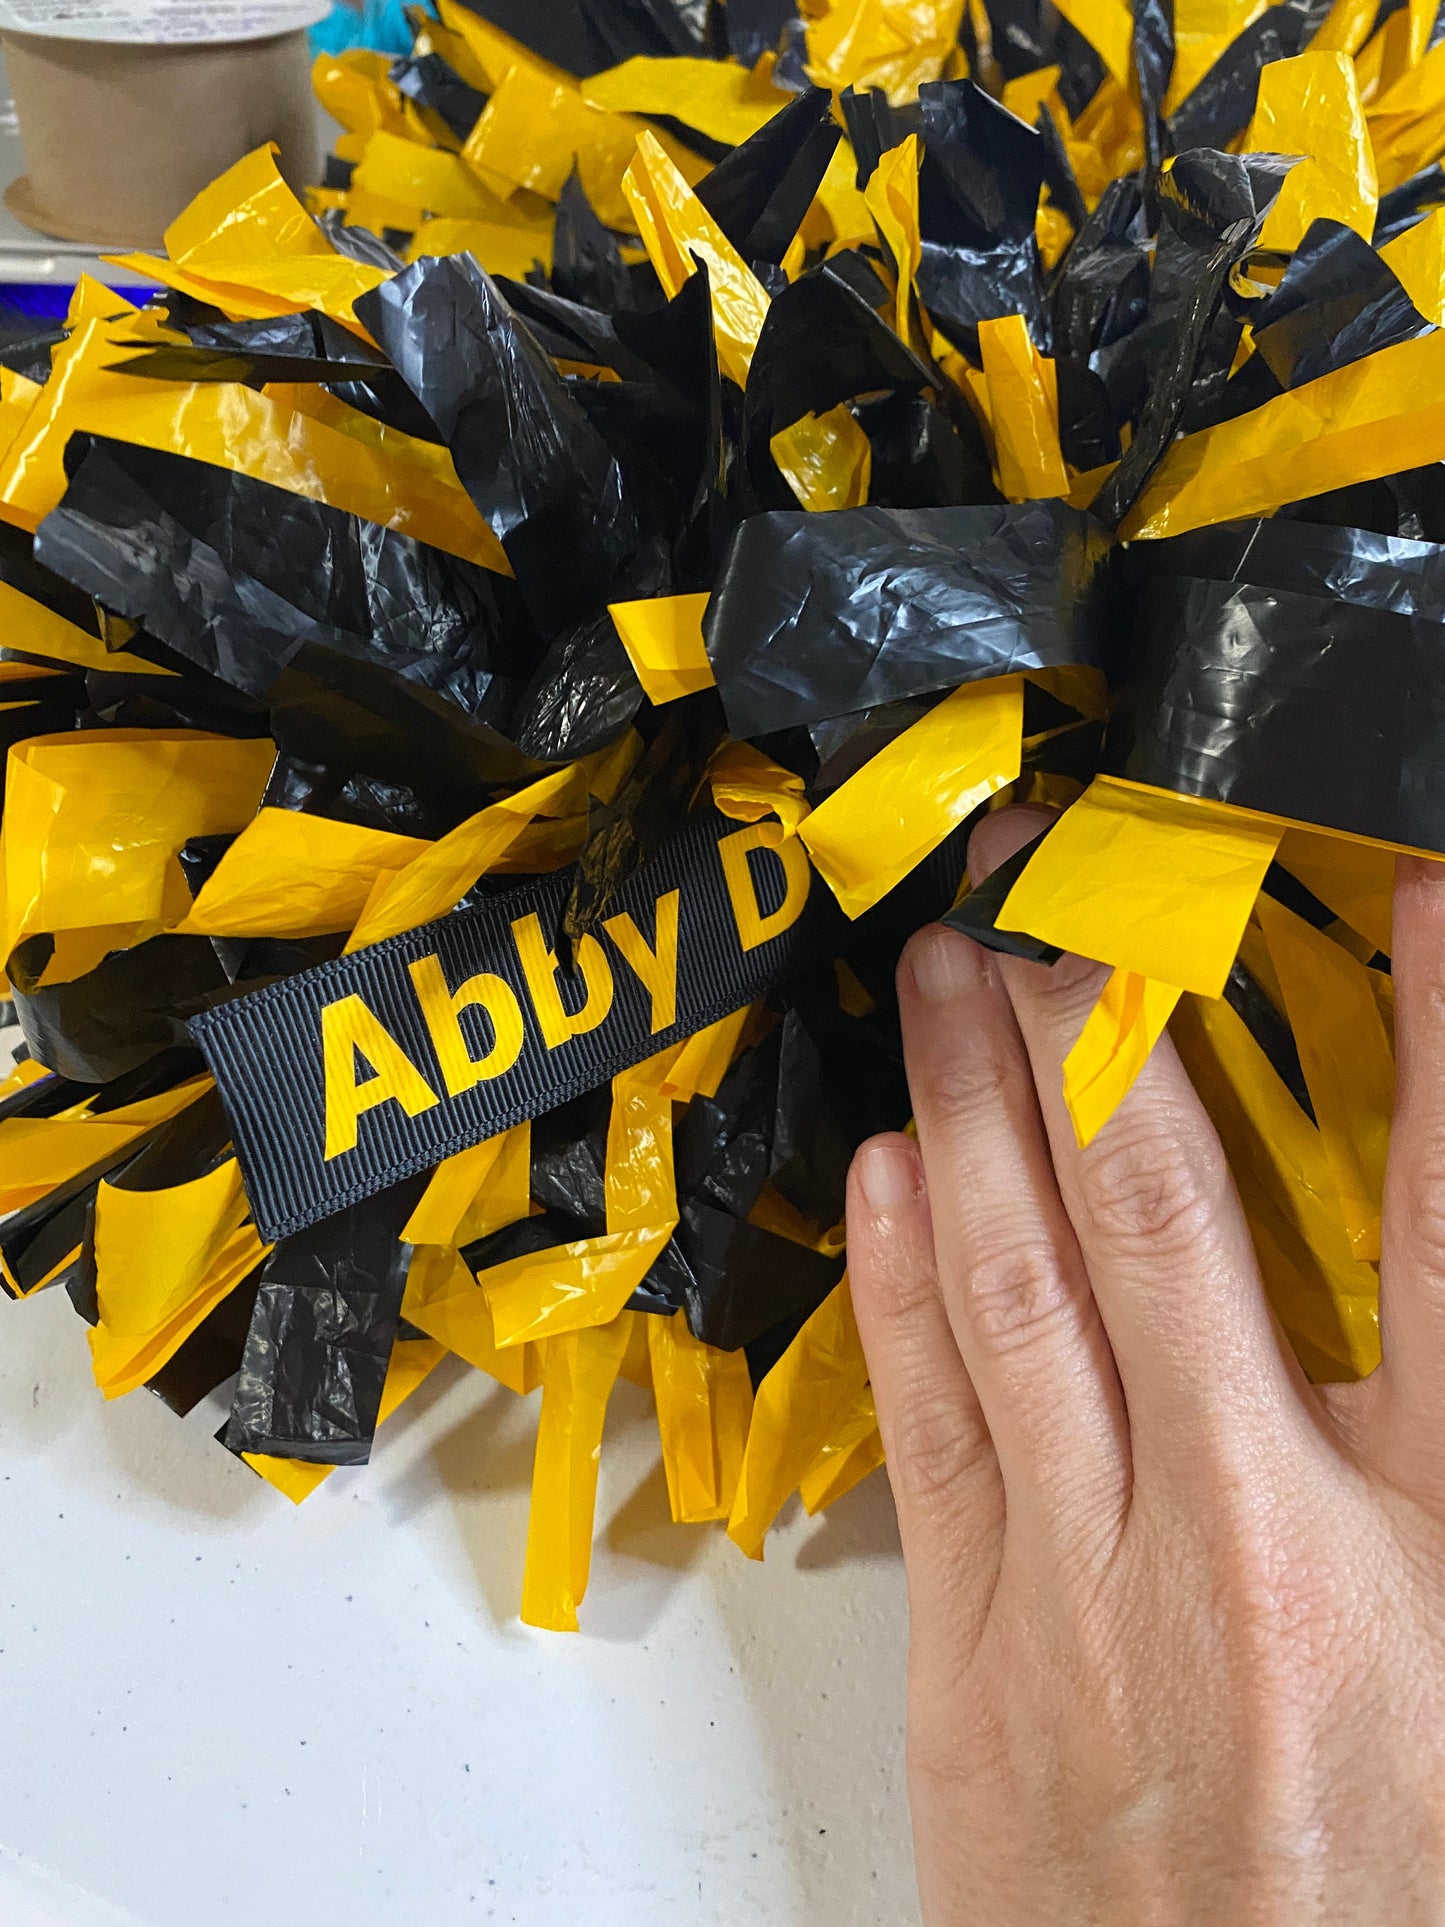 Personalized luggage tags for cheerleading and sports teams